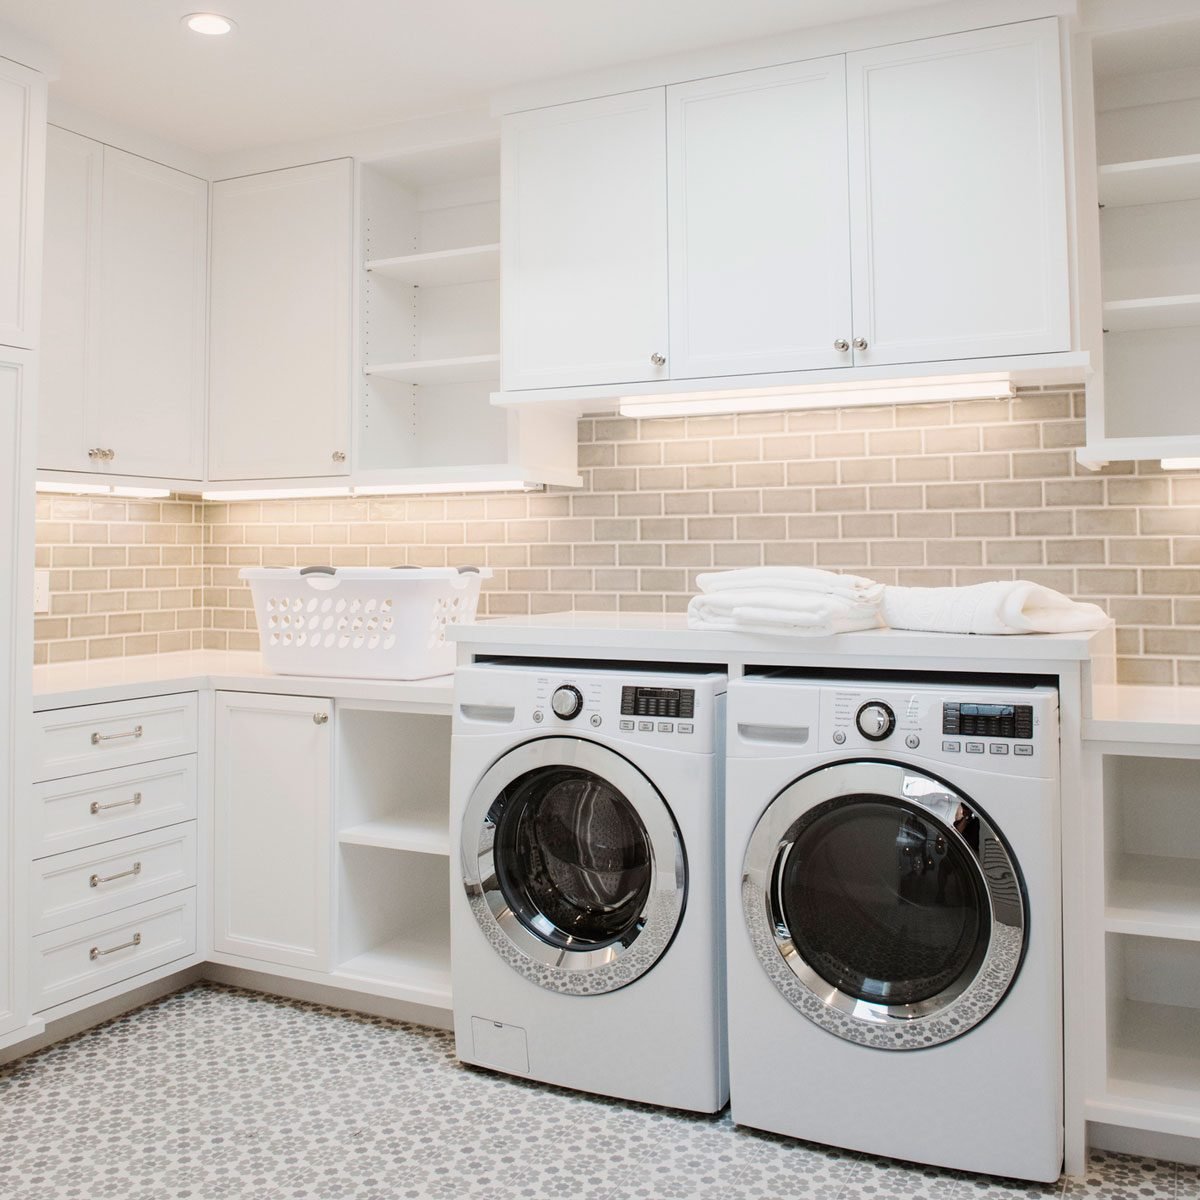 25 Laundry Room Ideas You Can Diy, How Deep Should Laundry Room Cabinets Be Made